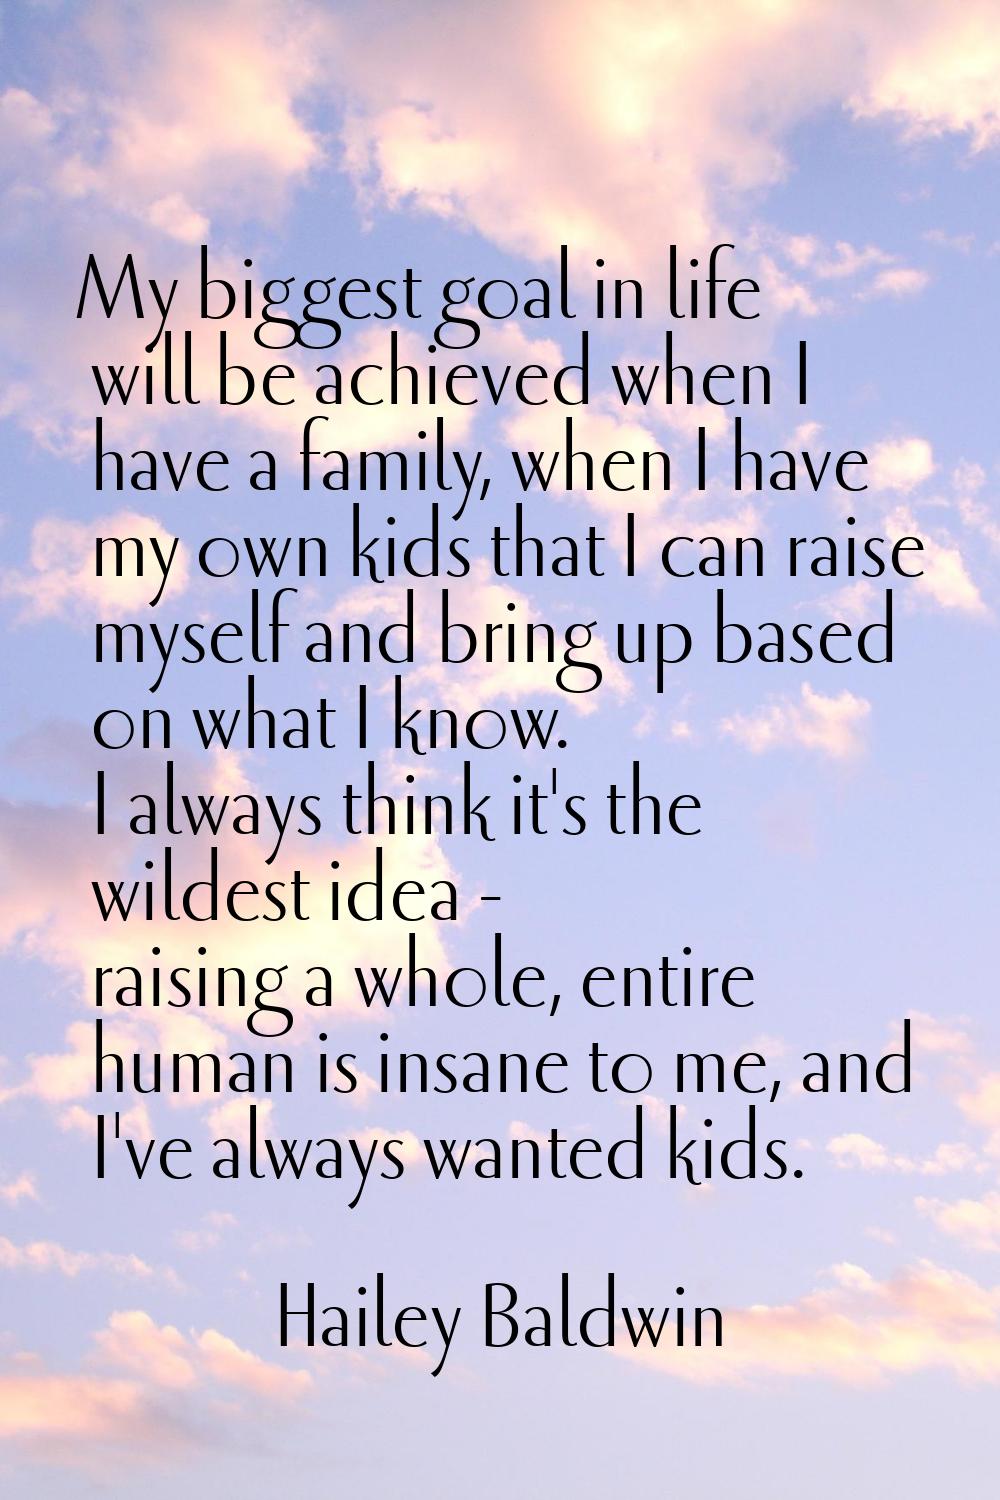 My biggest goal in life will be achieved when I have a family, when I have my own kids that I can r